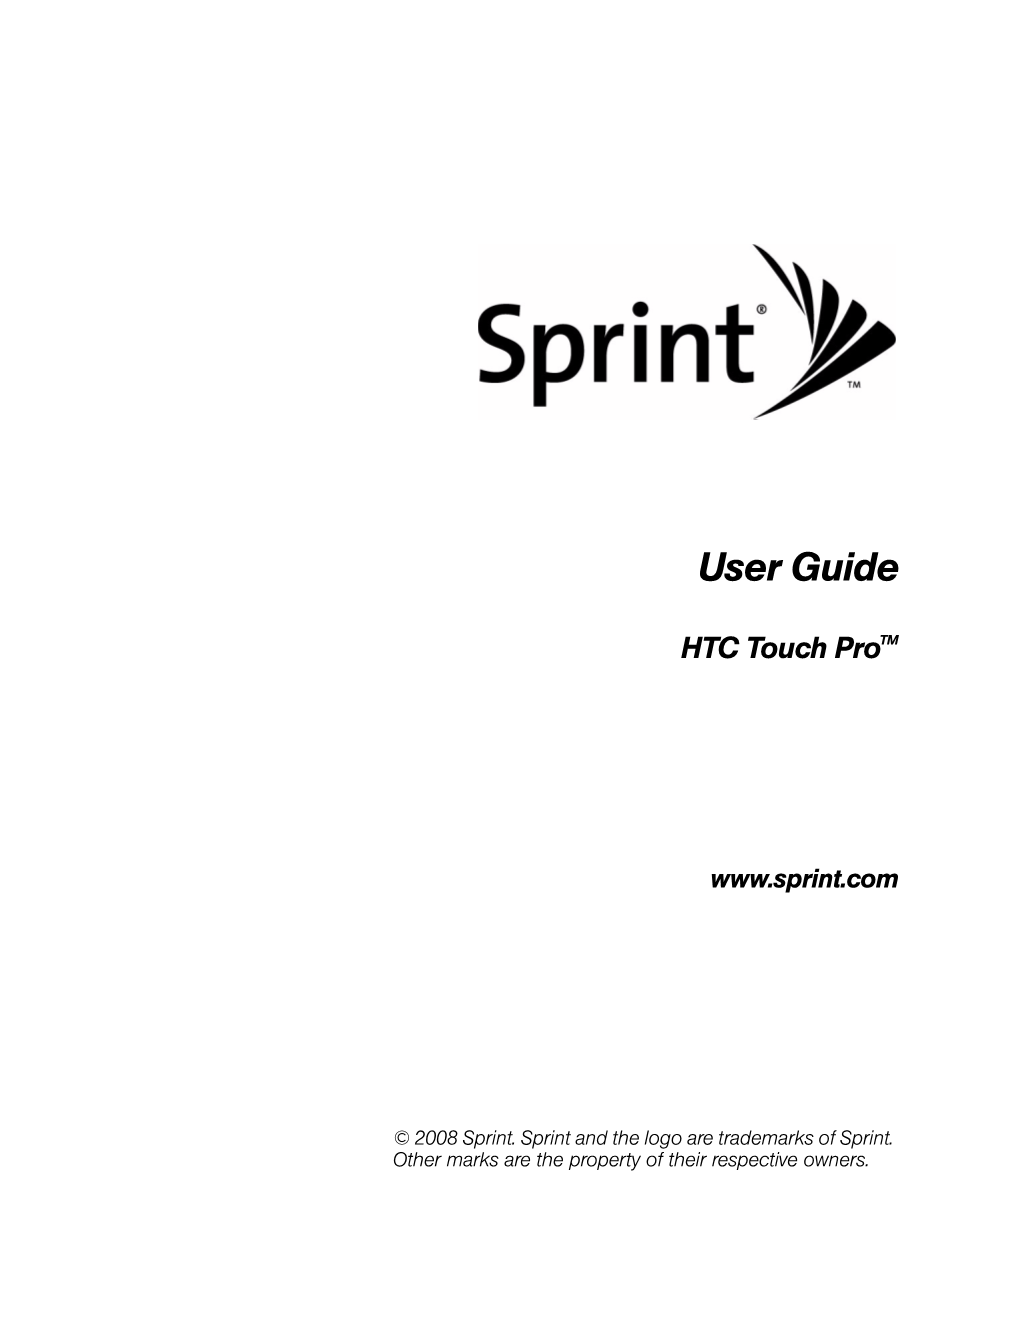 HTC Touch Pro User Guide